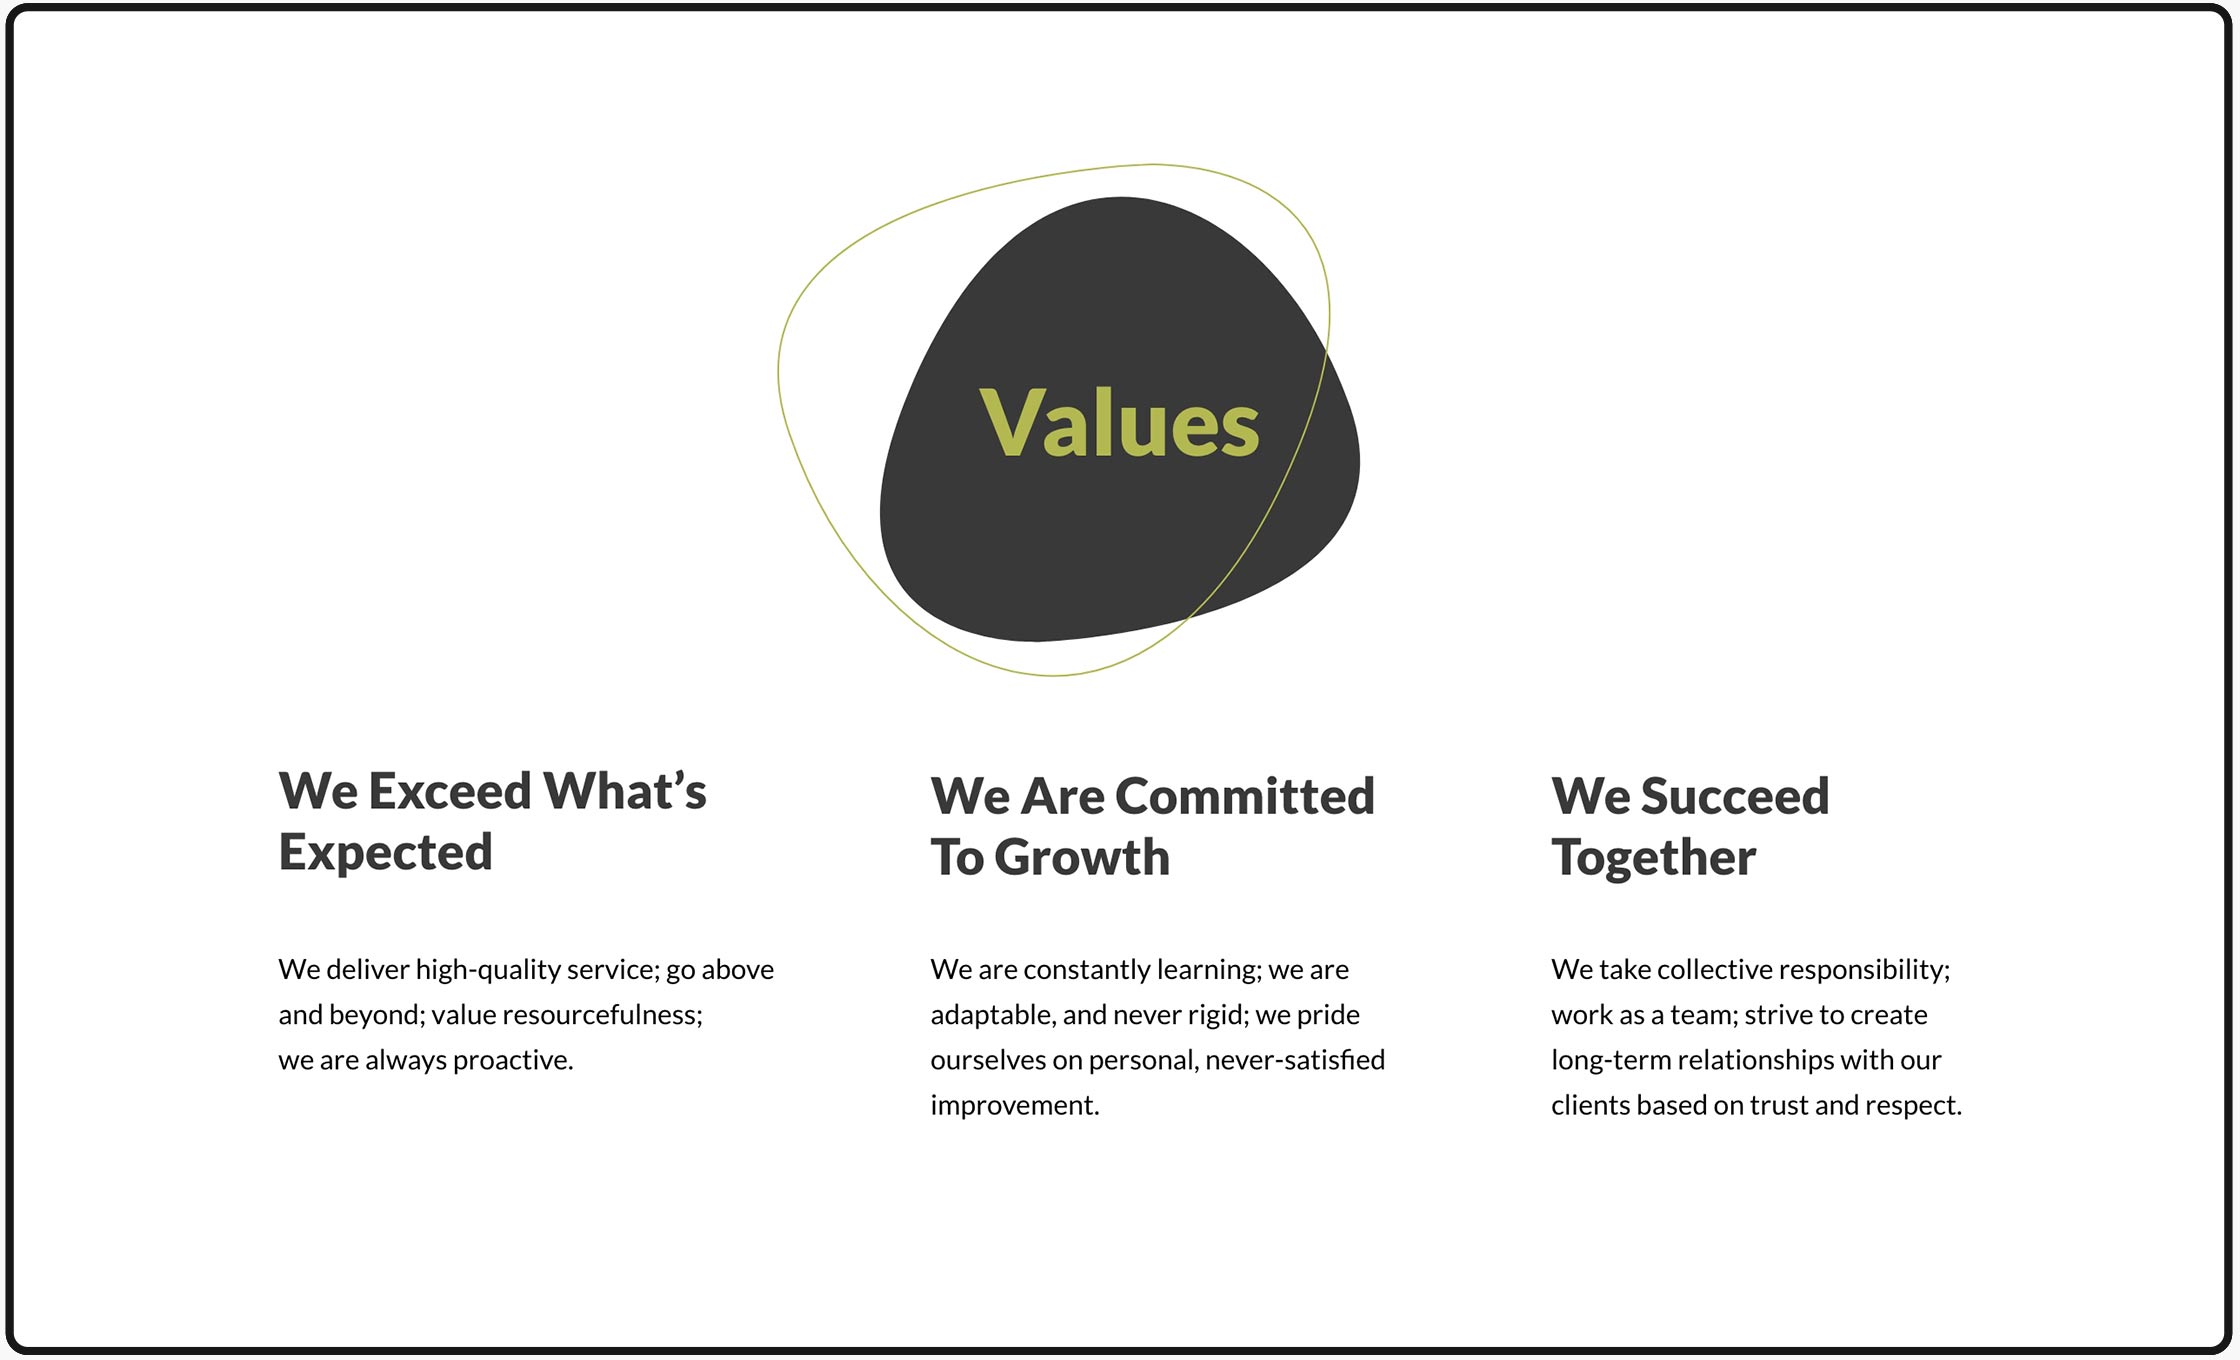 Values section on UI/UX design screen interface.